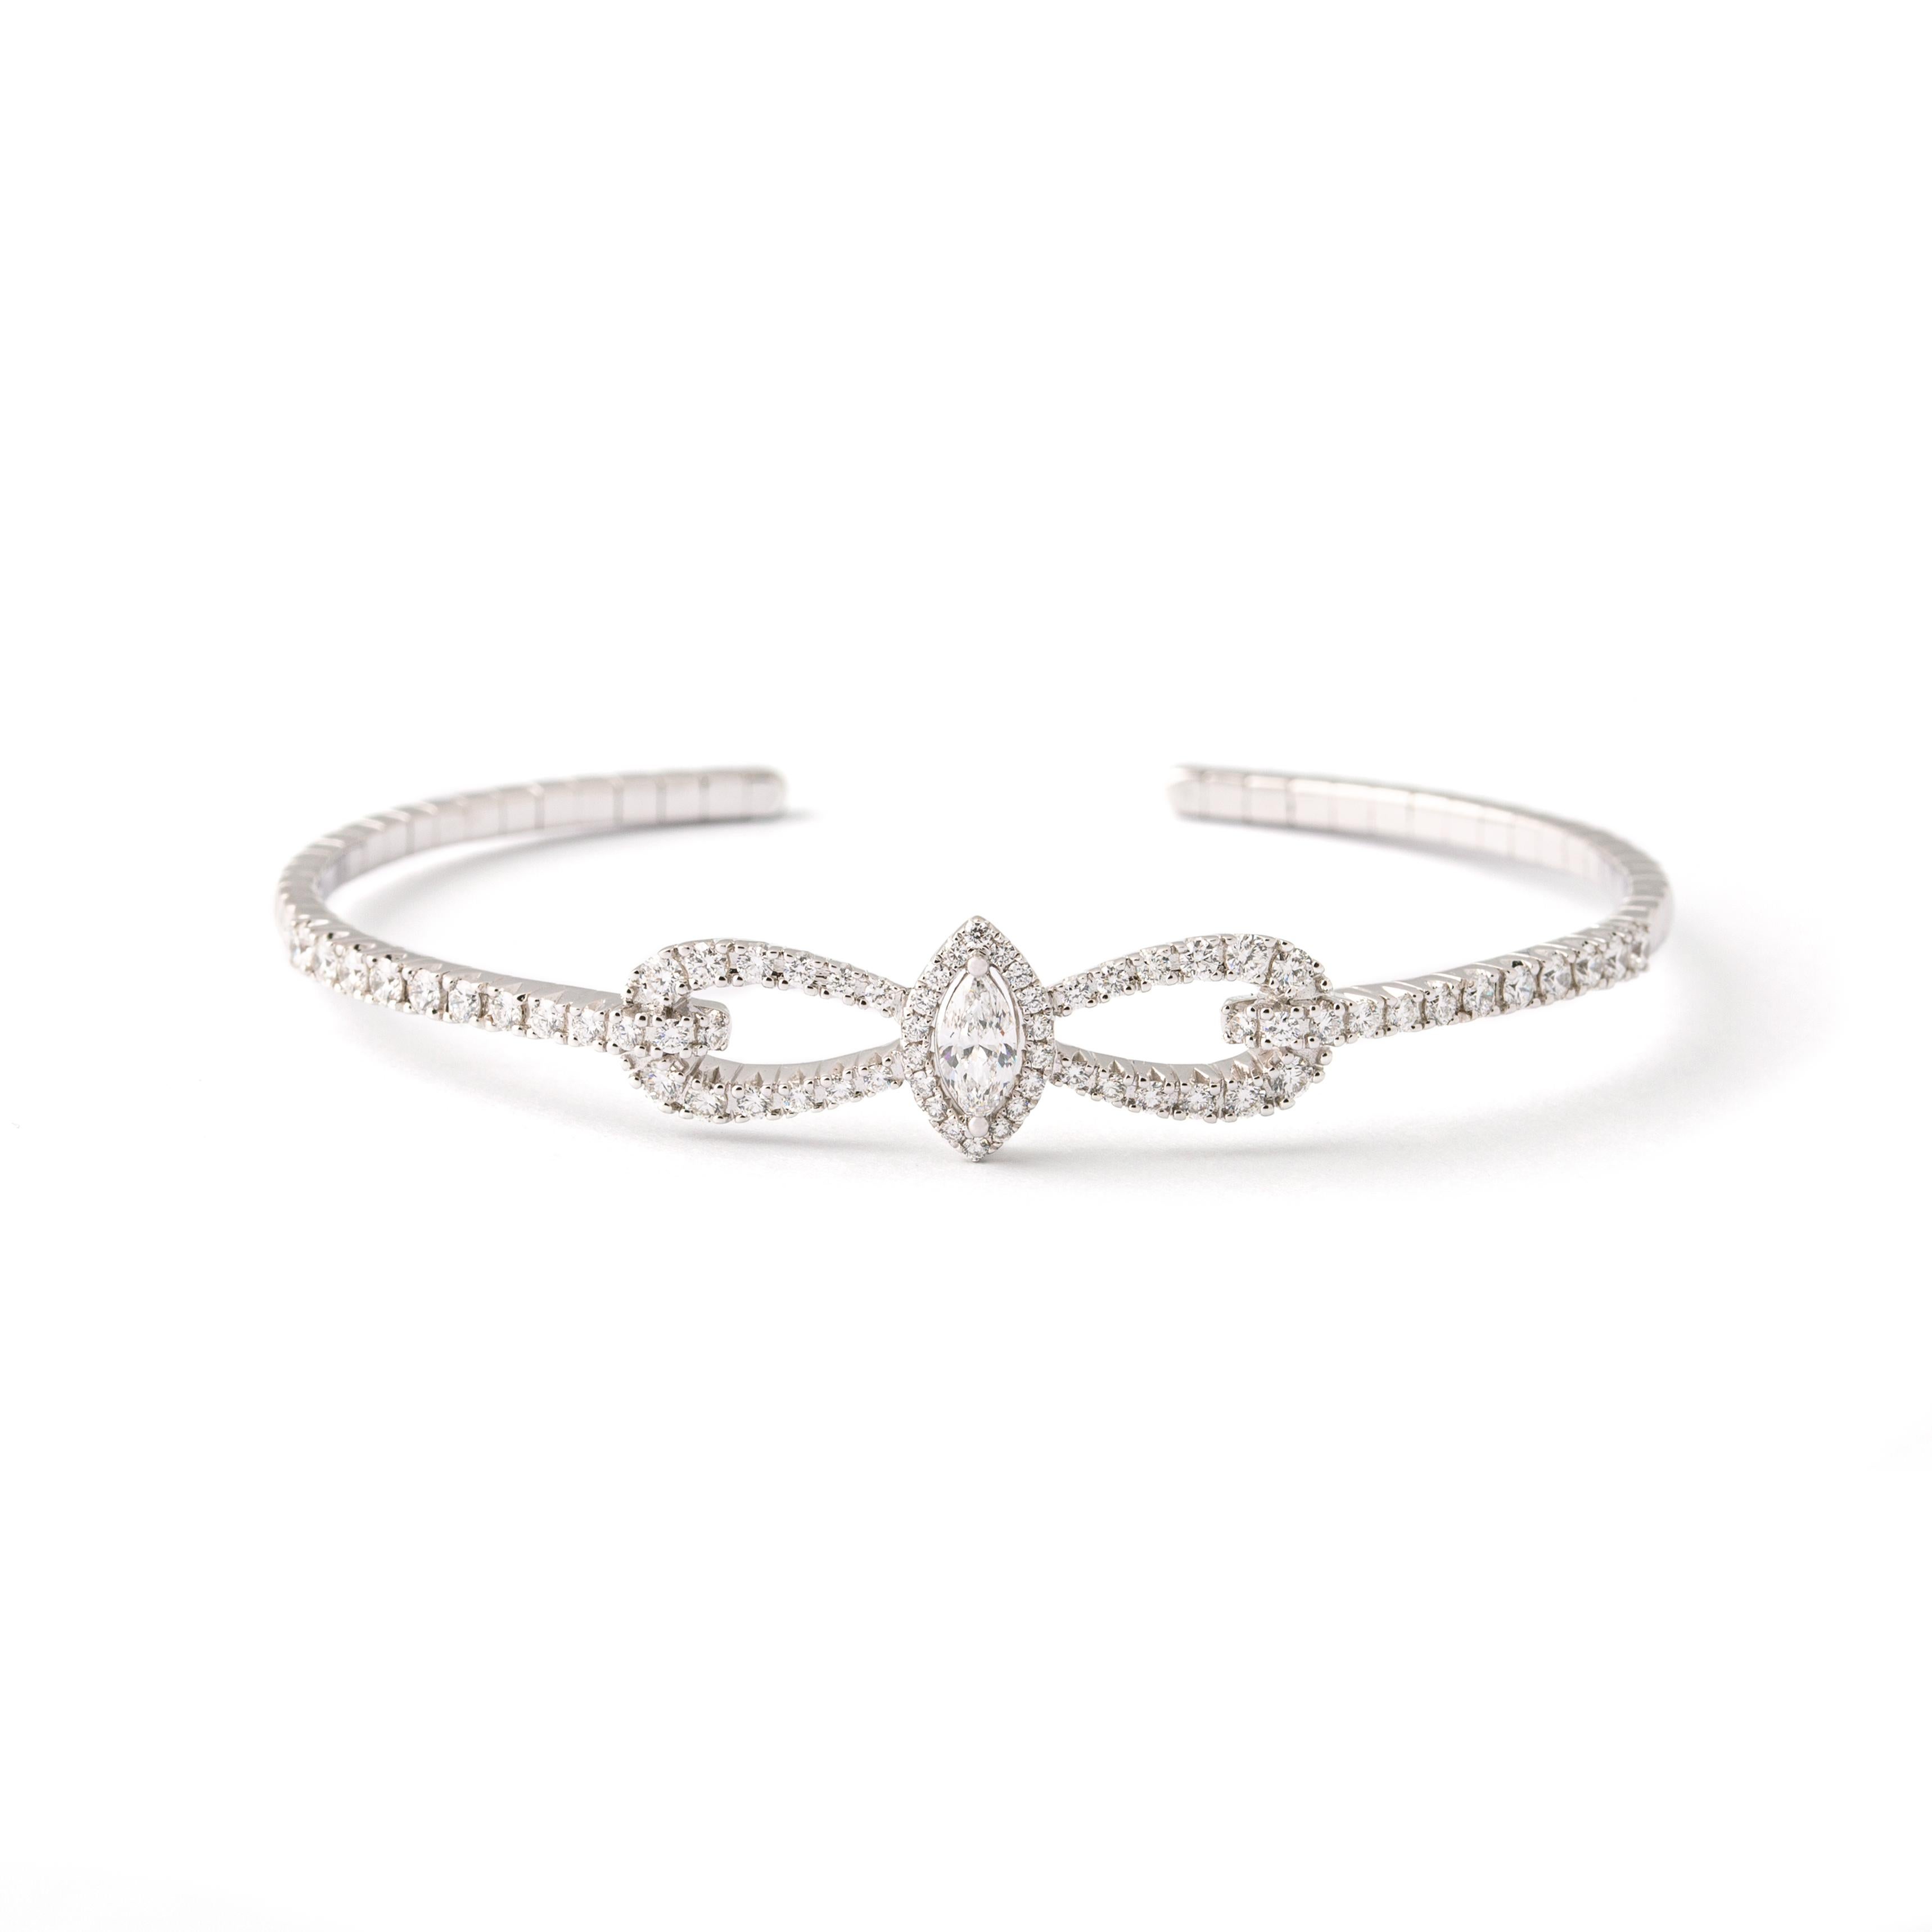 Bangle in 18kt white gold set with one marquise cut diamond 0.30 cts and 66 diamonds 1.37 cts.

Inner circumference: Approx. 17.27 centimeters (6.80 inches) up to 18.84 centimeters (7.42 inches).

Note: Flexible Bracelet.

Width on the top: 1.1